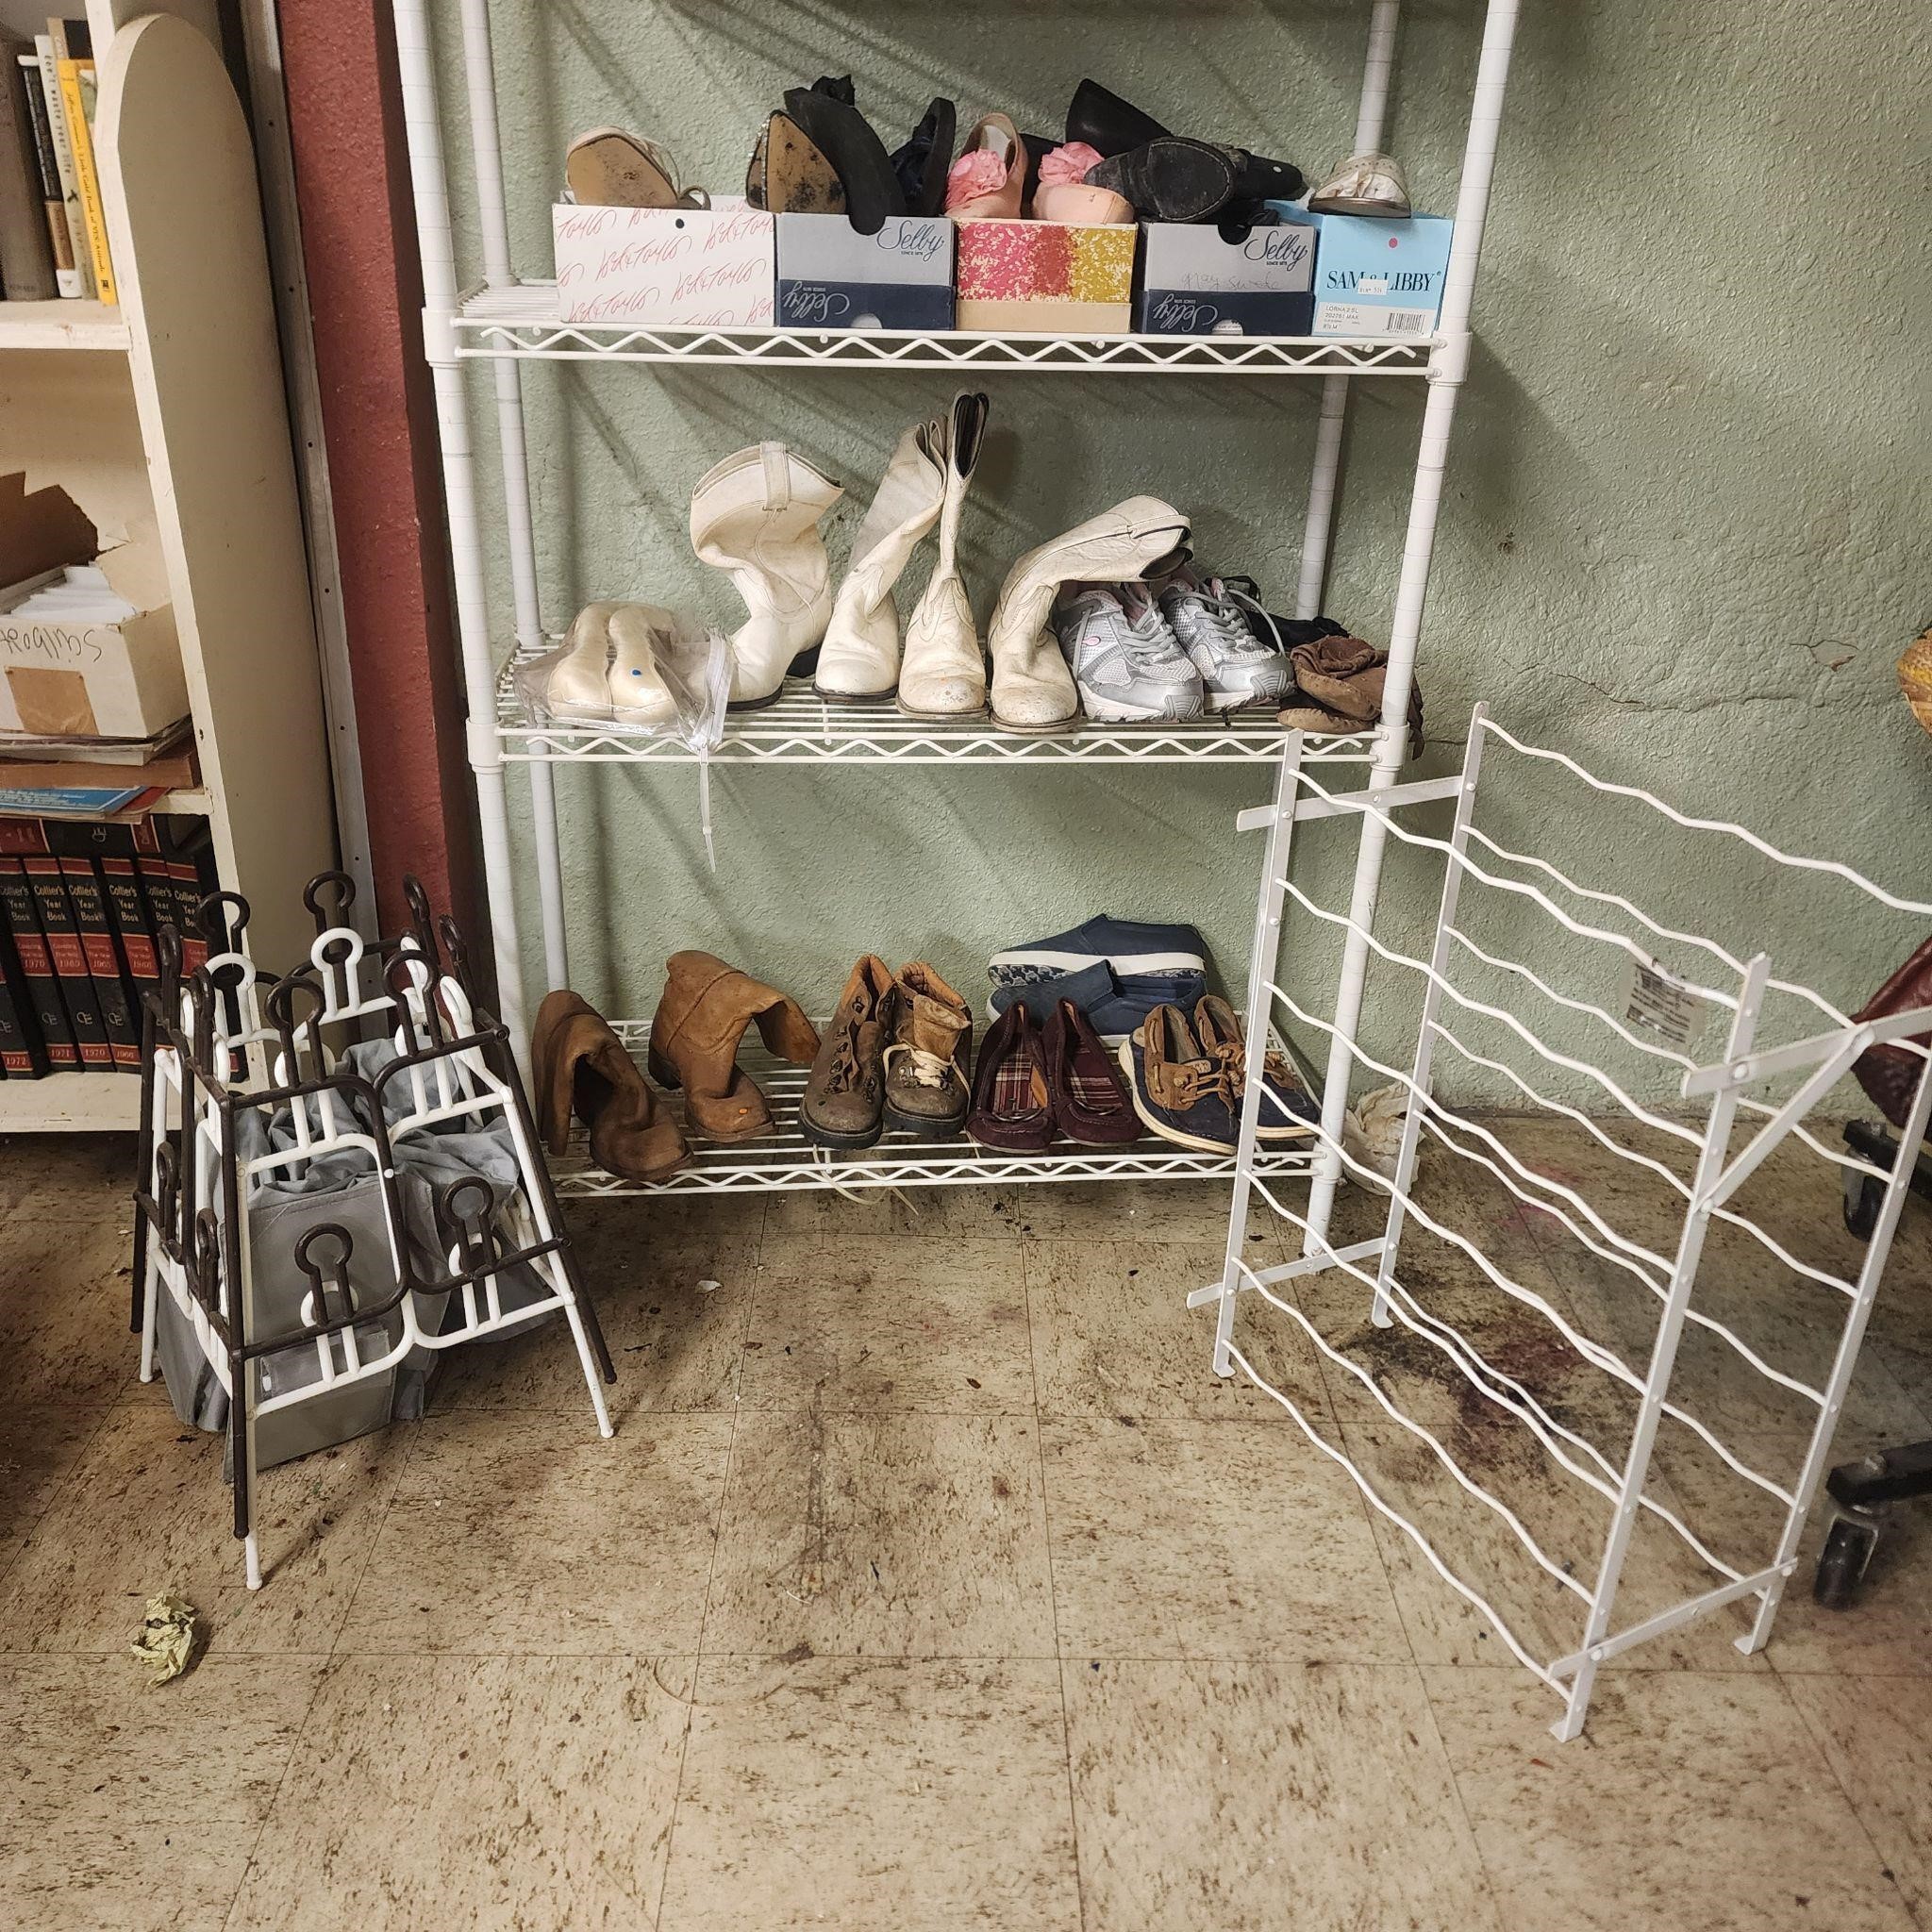 Shoes & boots, some vintage